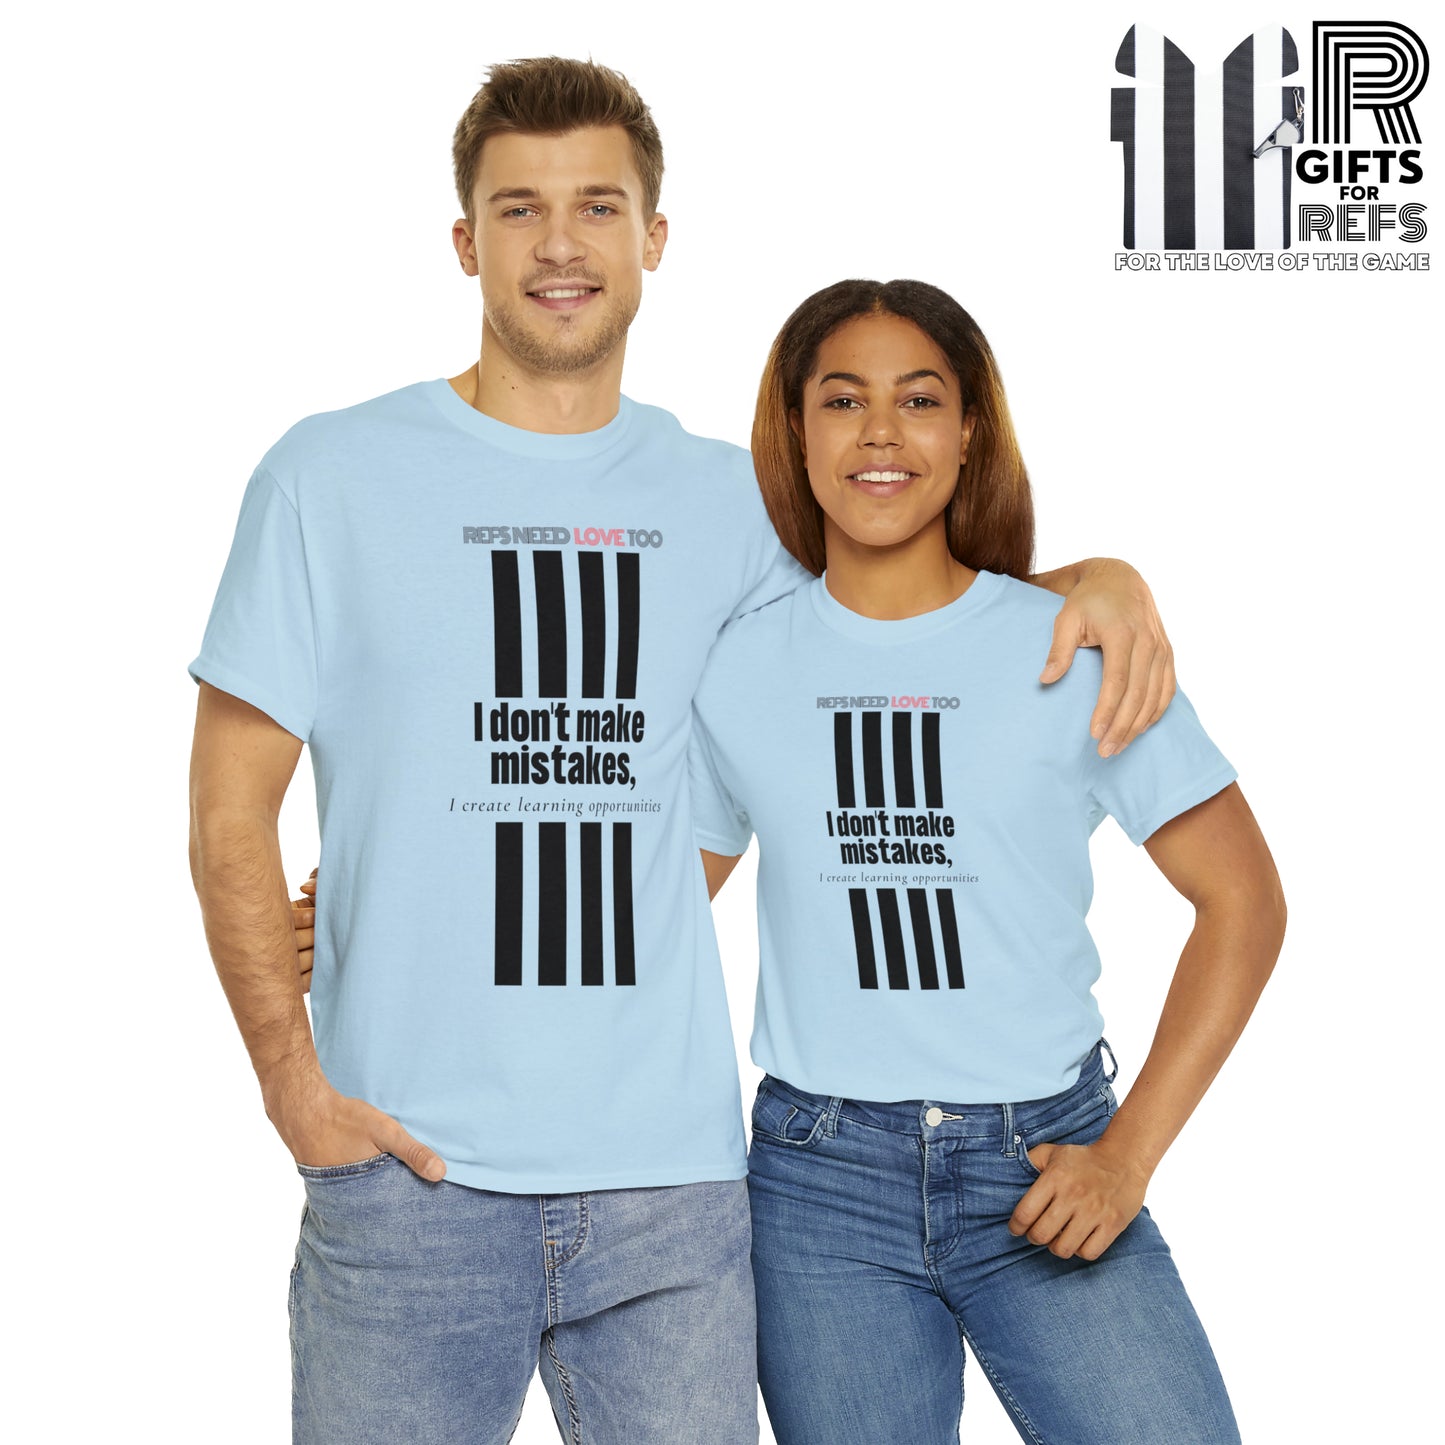 I don't make mistakes cotton tee | Funny Referee t-shirt | Gifts for refs and umps | screen printed shirt | For sports officials | Refs Need Love Too